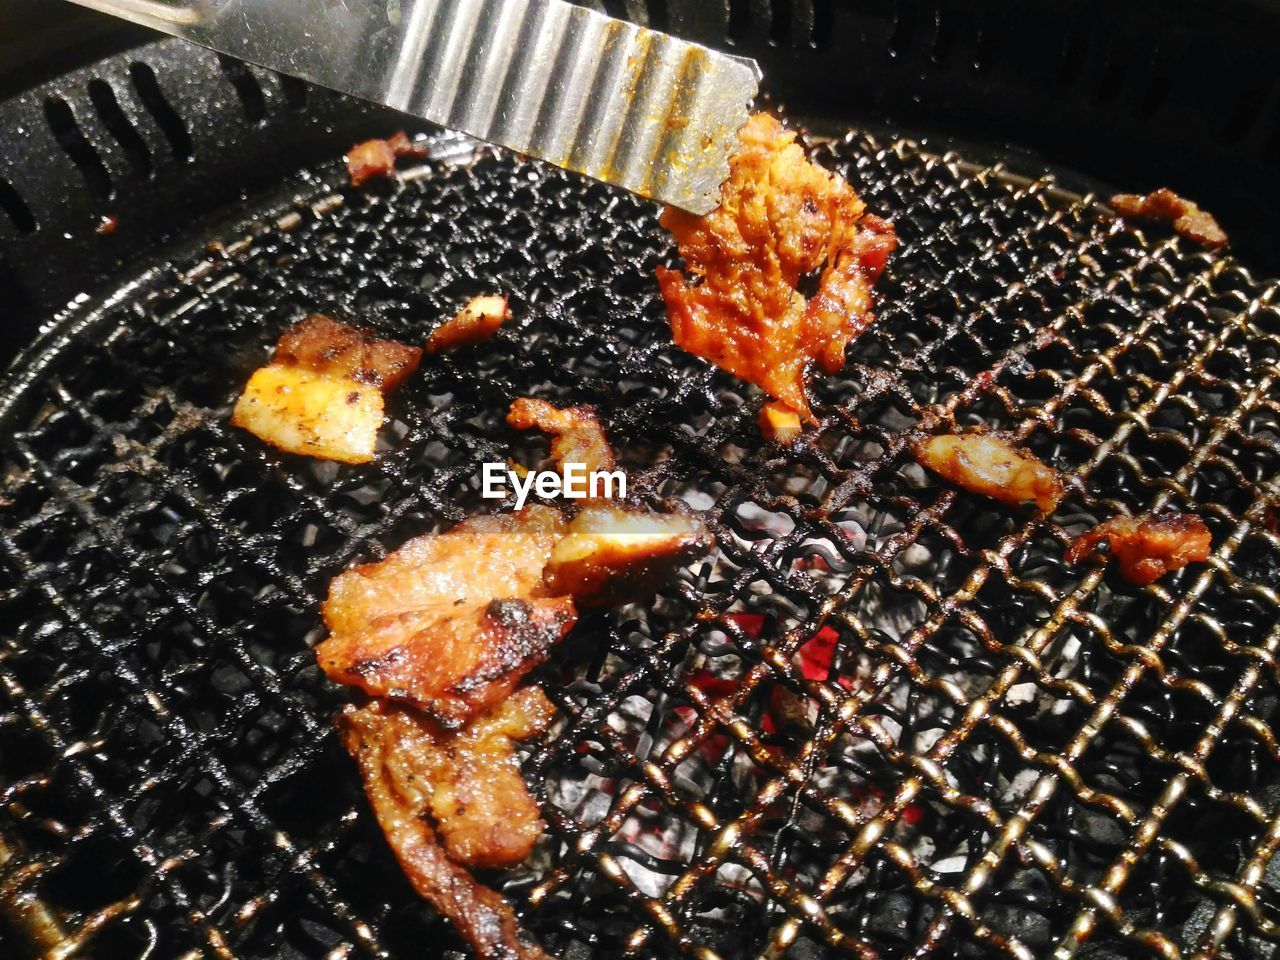 CLOSE-UP OF BARBECUE GRILL